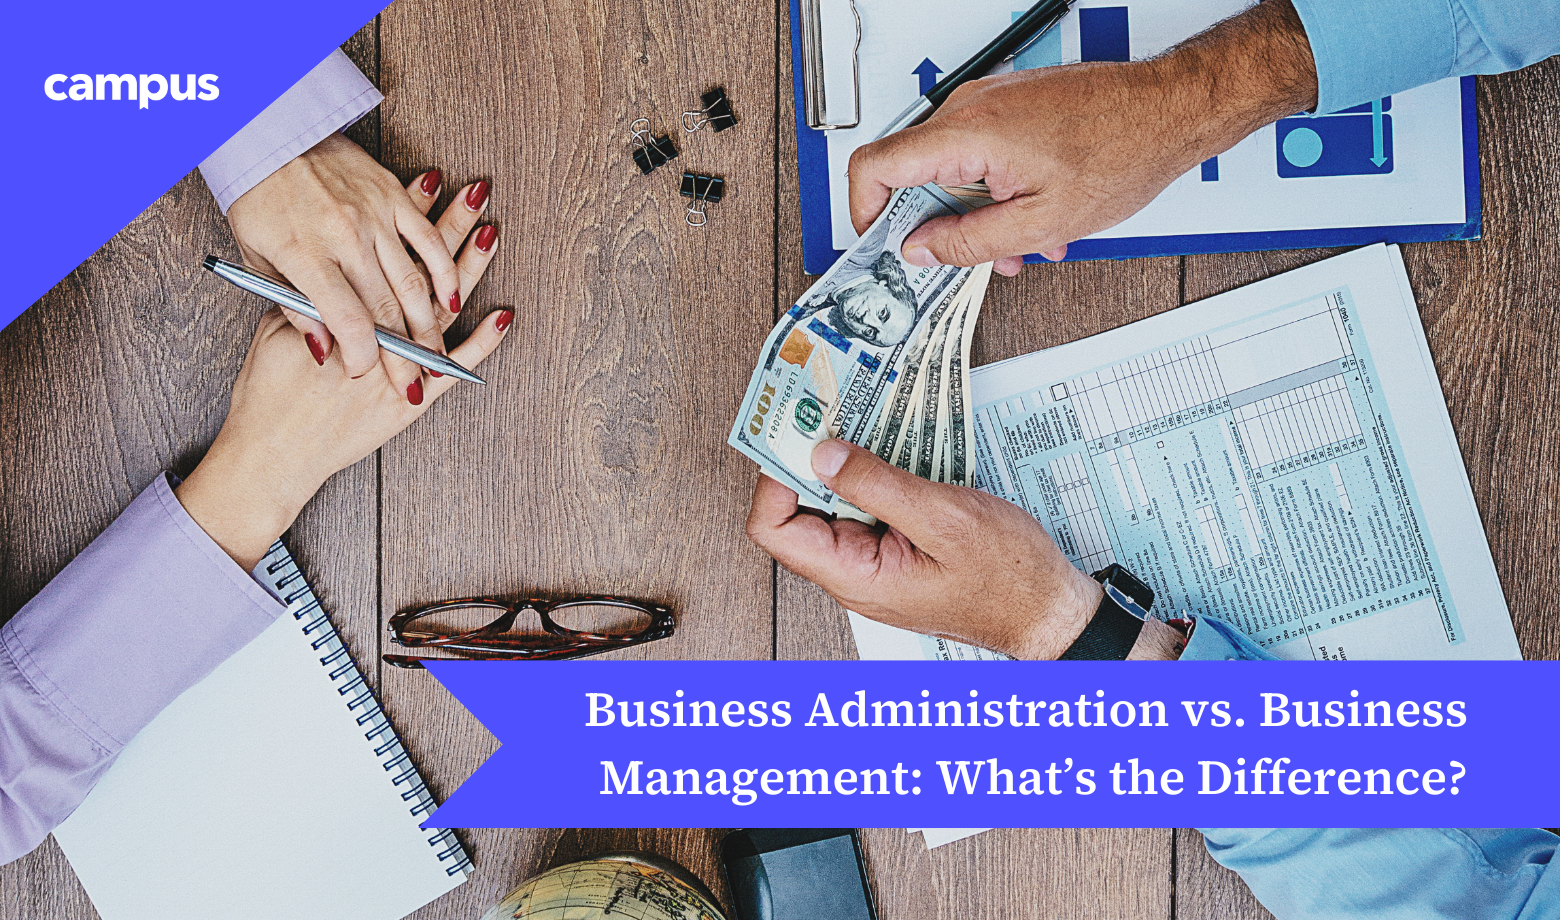 Business Administration vs. Business Management: What’s the Difference?